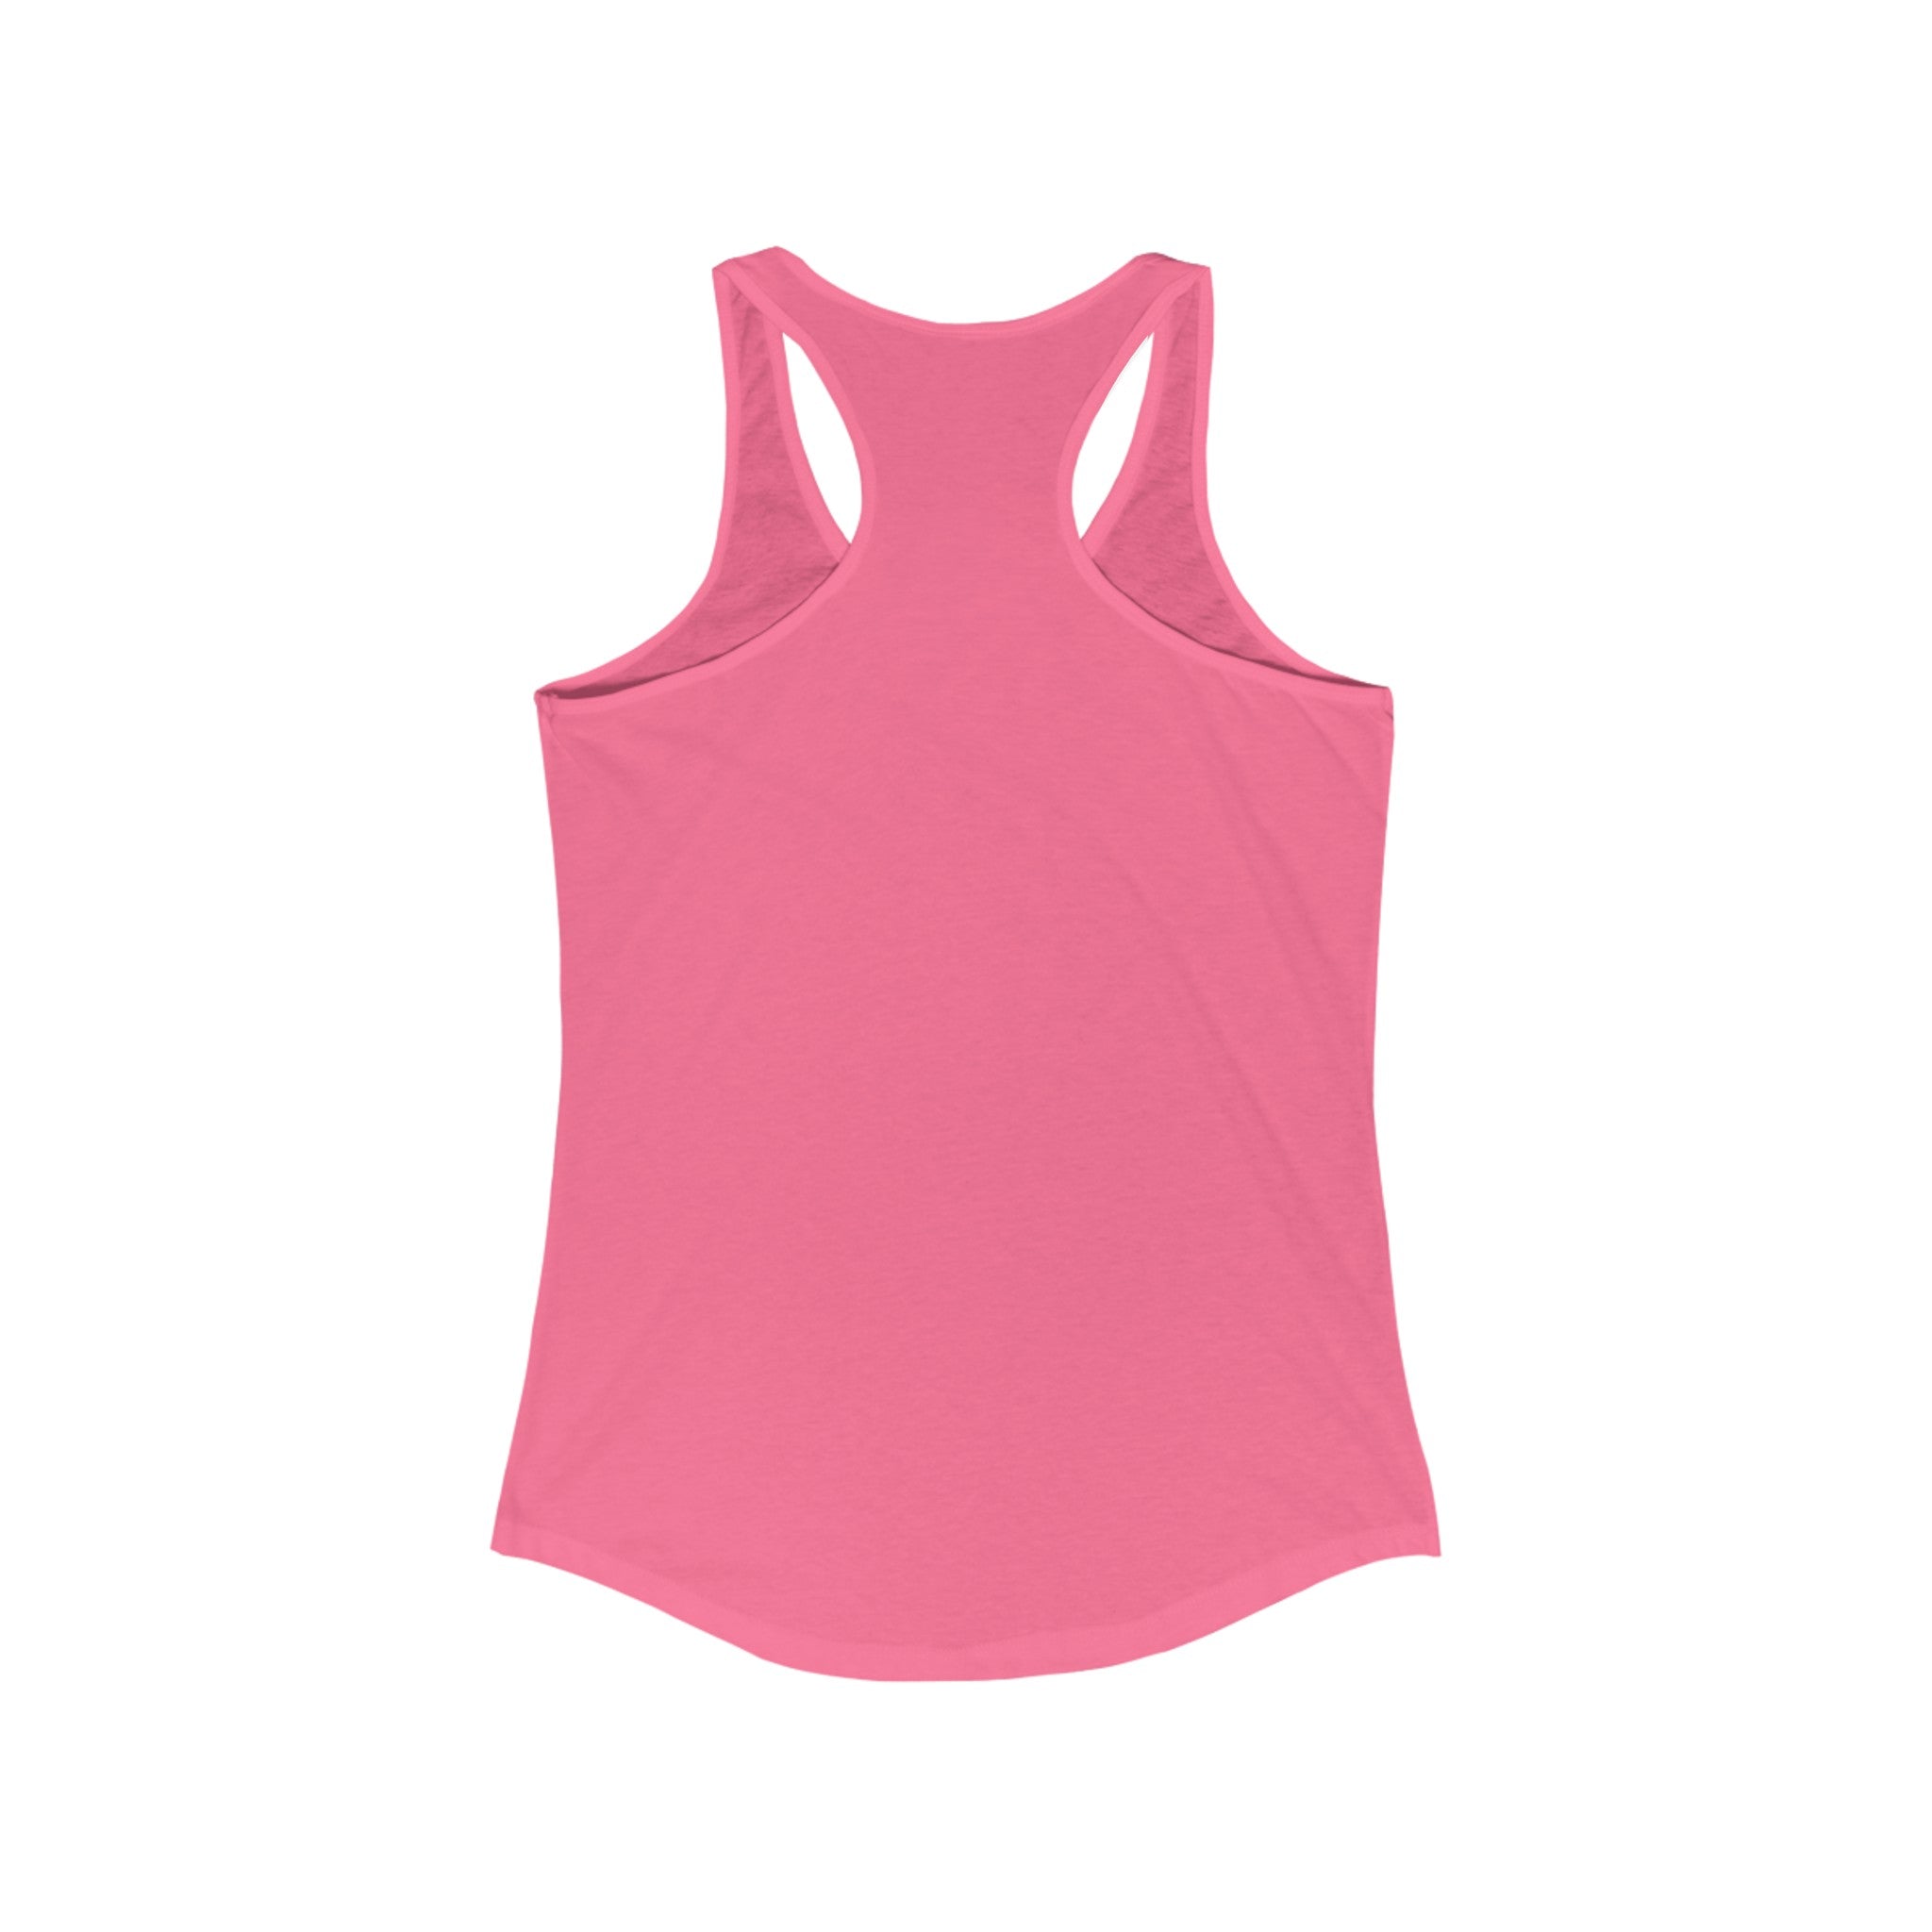 5964496604251629305_2048.jpg - Keep on Detailing v2 Women's Tank - Undrdog Surface Products